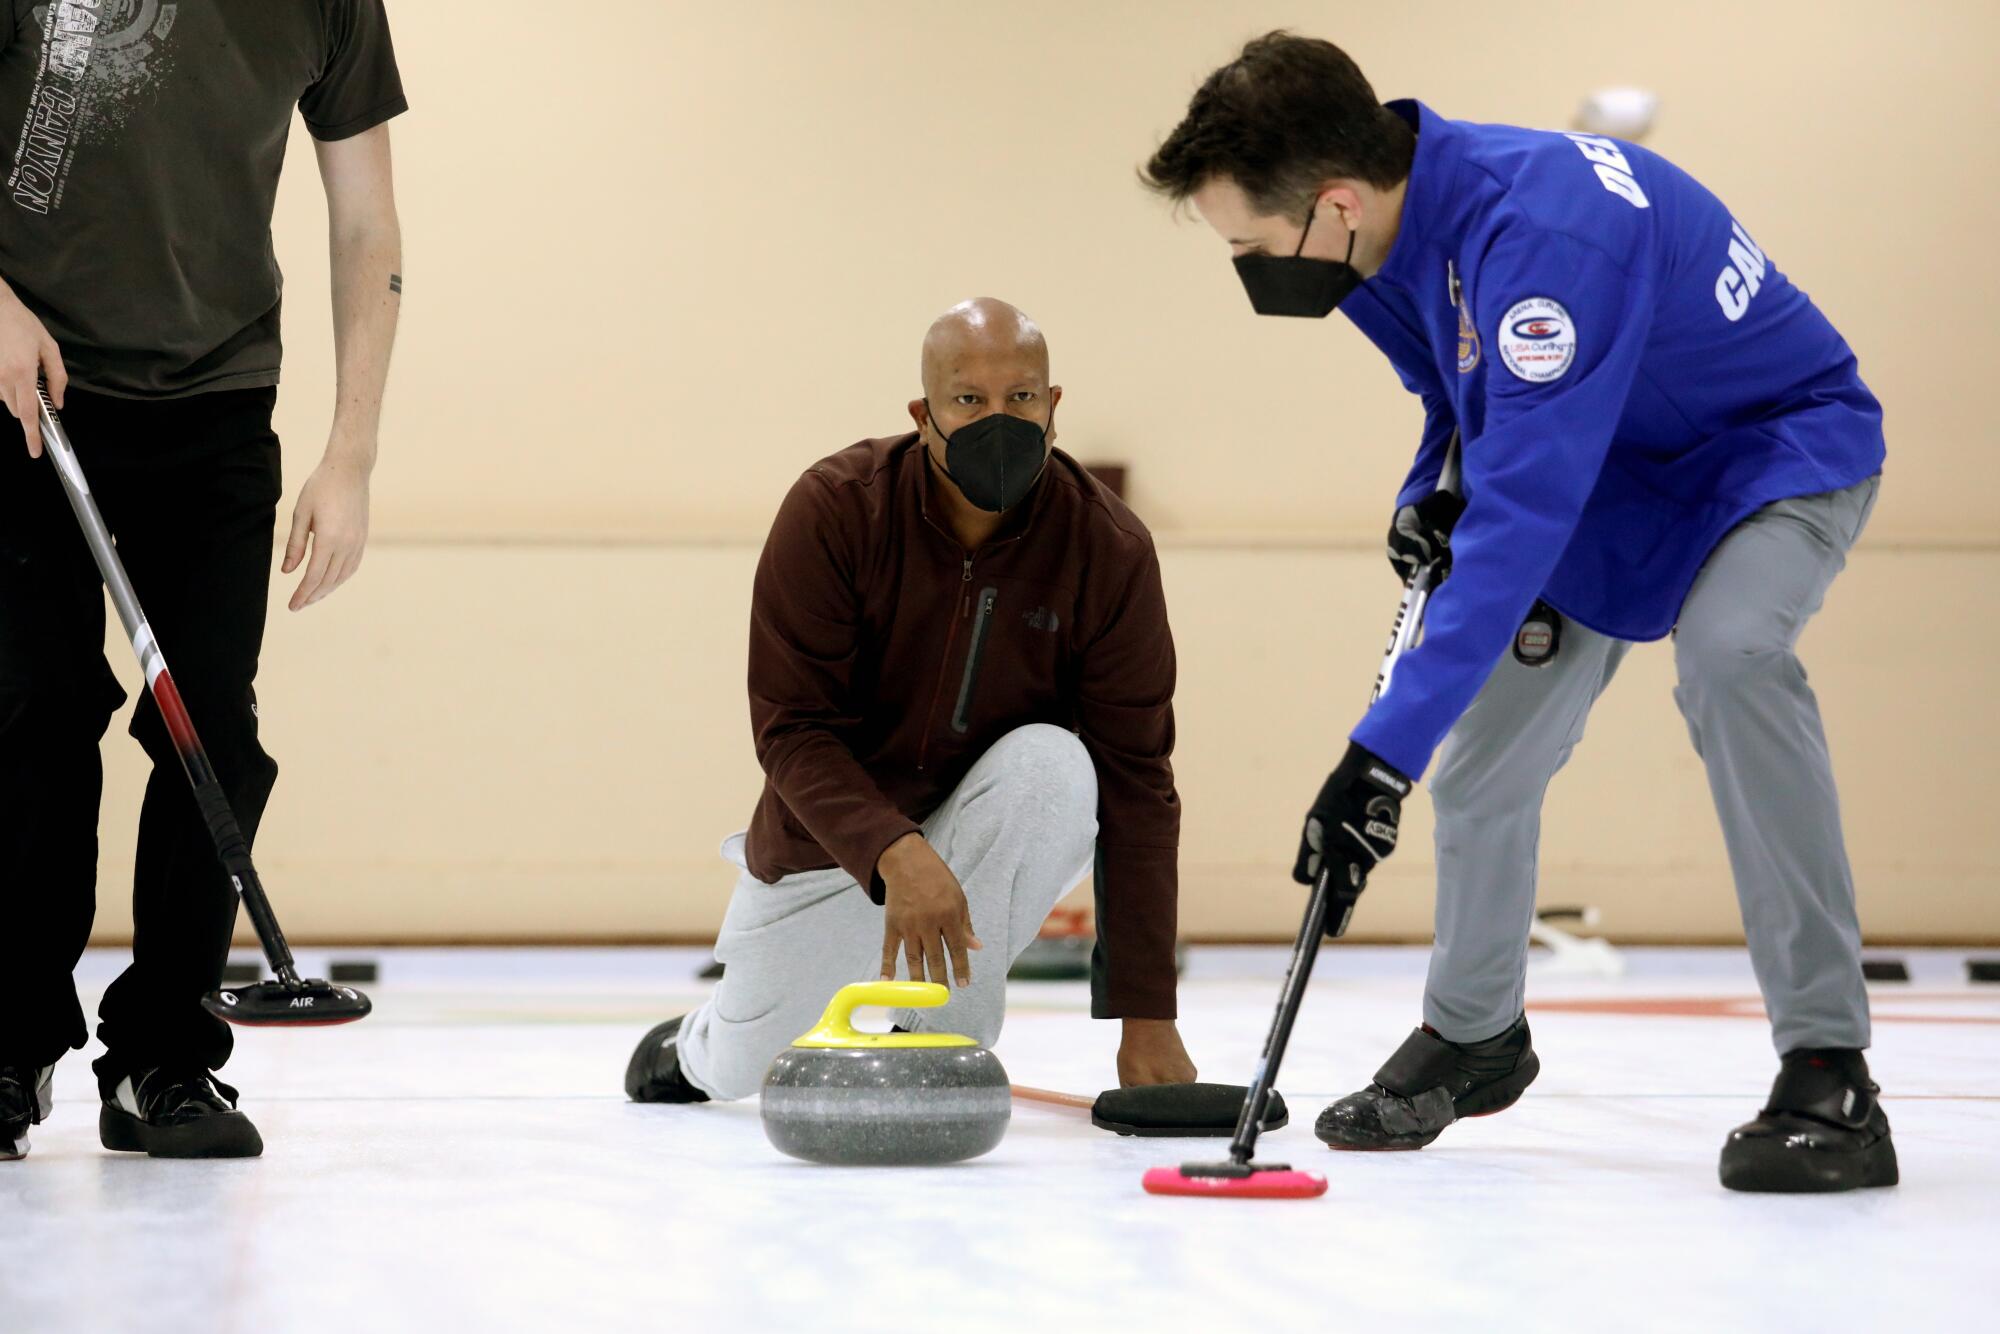 USA Curling is in open revolt over its CEO : NPR